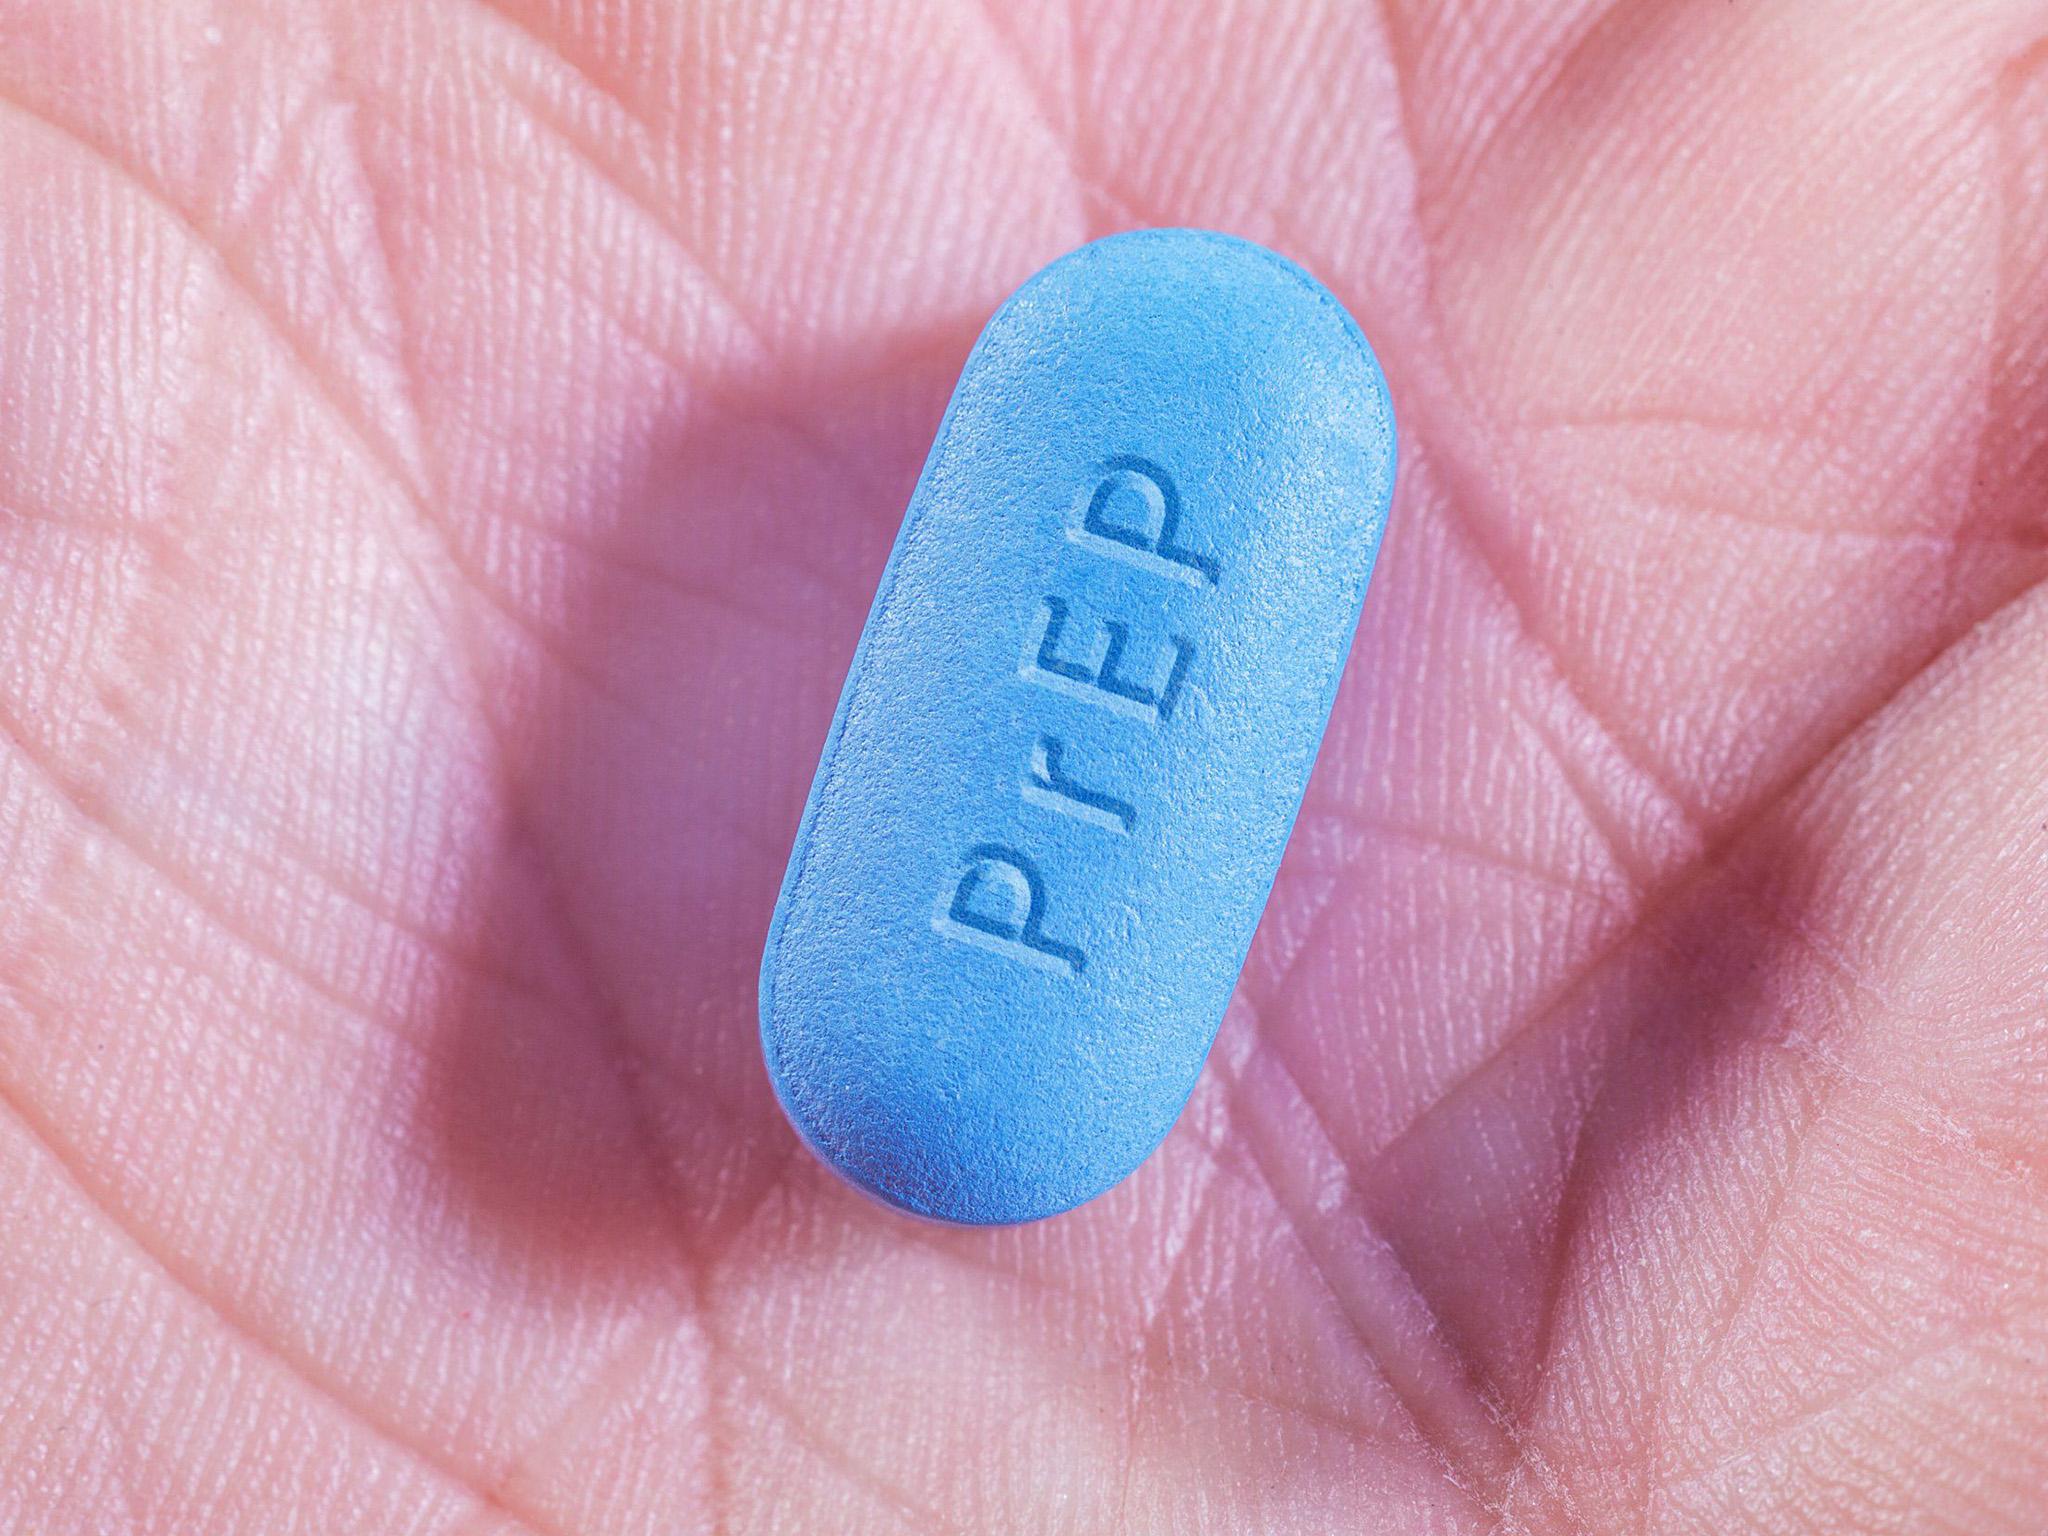 PrEP is given to those considered to be at ‘high risk’ of contracting HIV